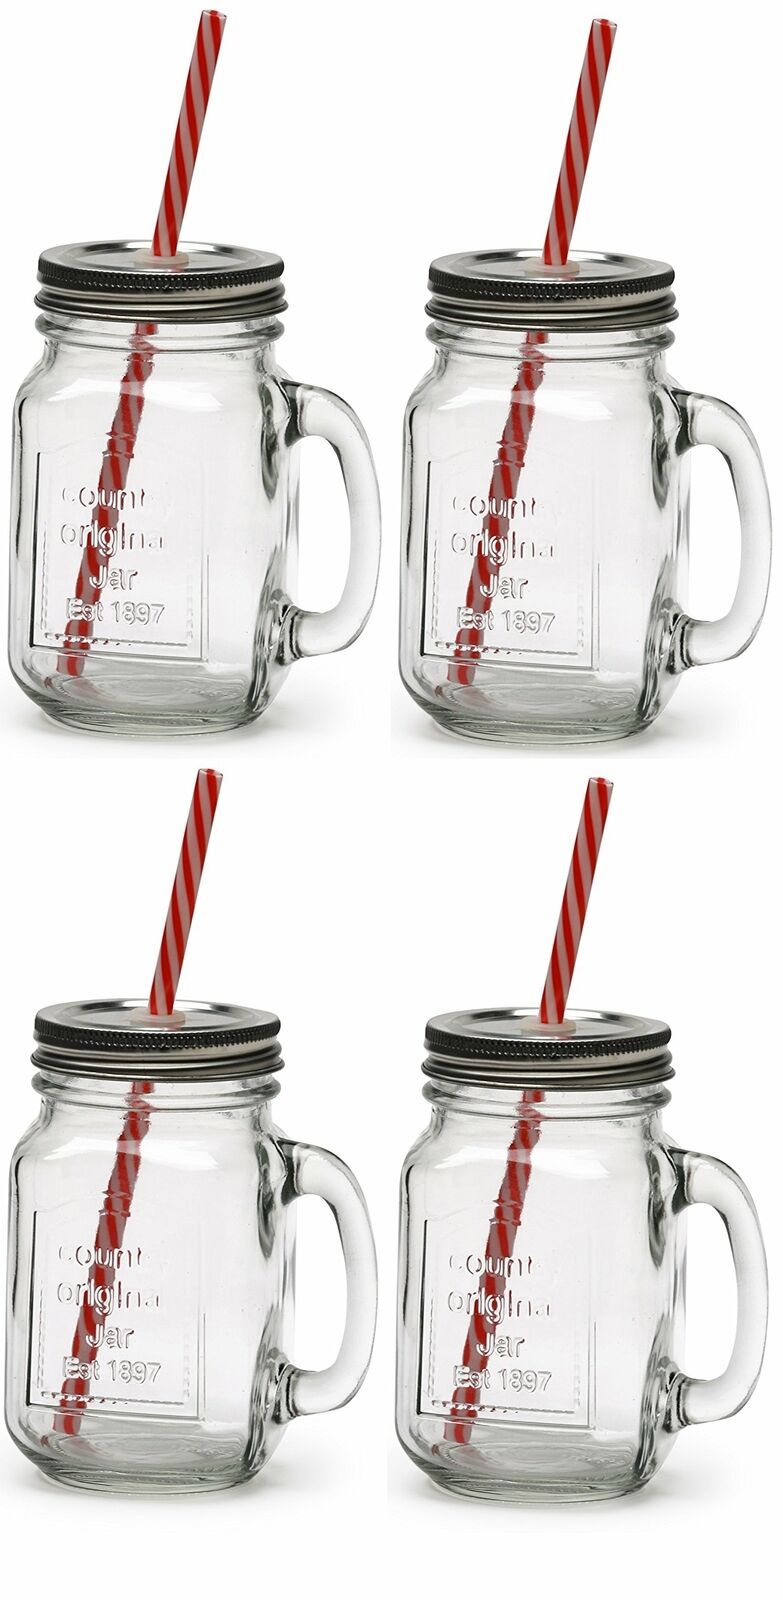 Mason Jar Mugs with Handle, Regular Mouth Colorful Lids with 2 Reusable  Stainless Steel Straw, Set o…See more Mason Jar Mugs with Handle, Regular